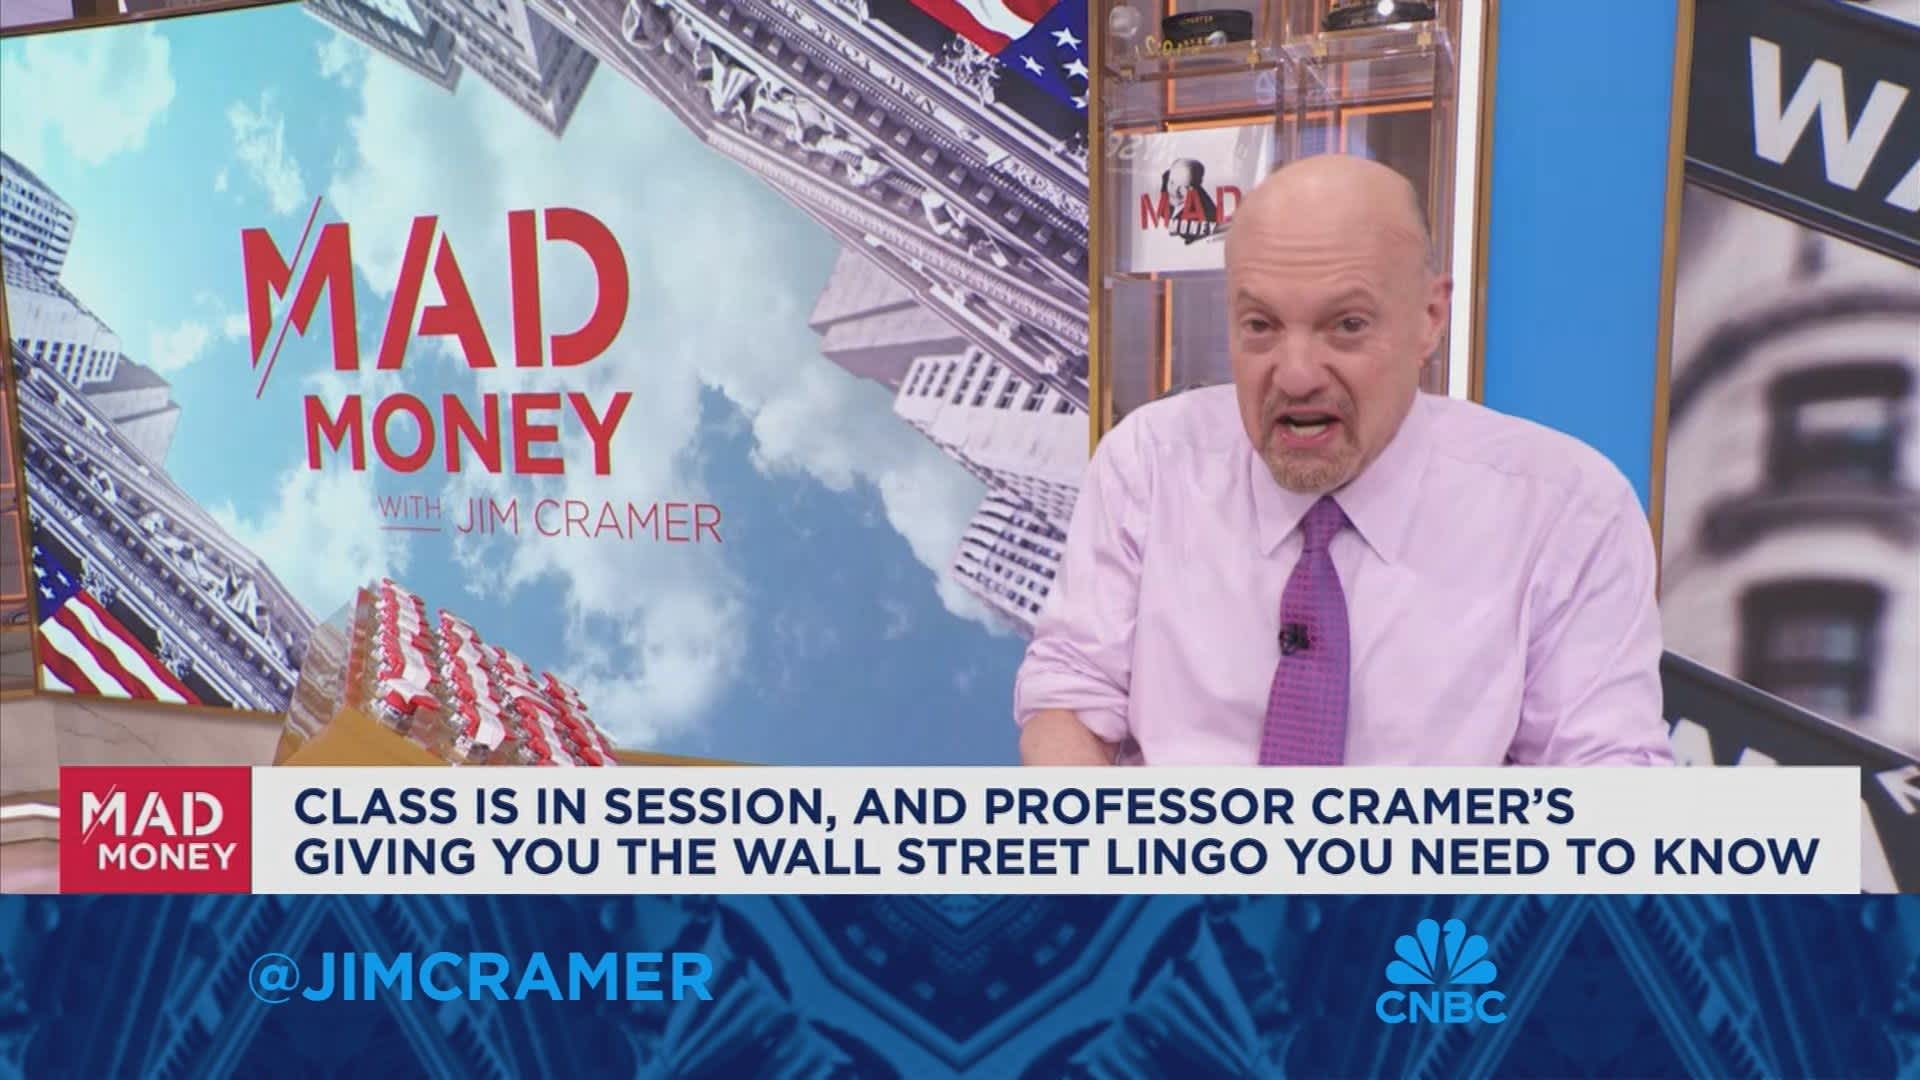 Bank, steel and auto stocks climbed after AI stocks stopped rolling, says Jim Cramer on markets